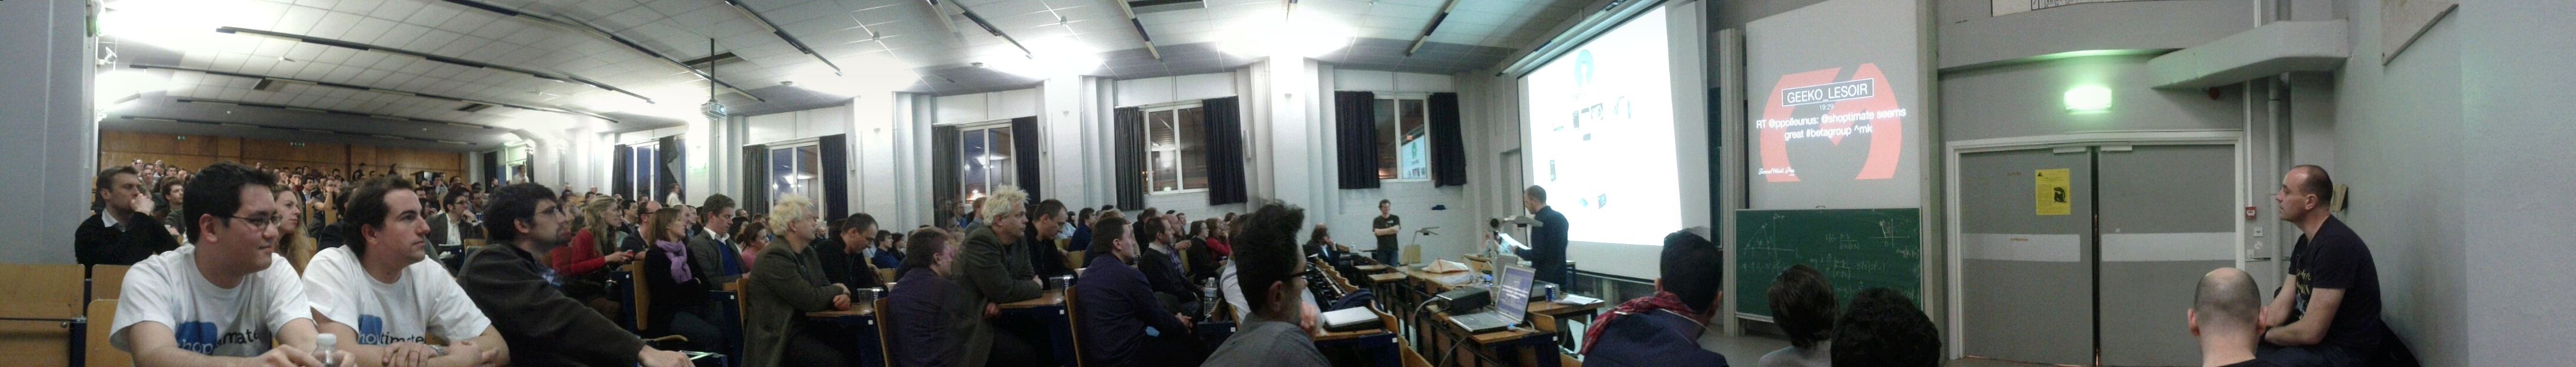 Audience at Betagroup startup event in Brussels